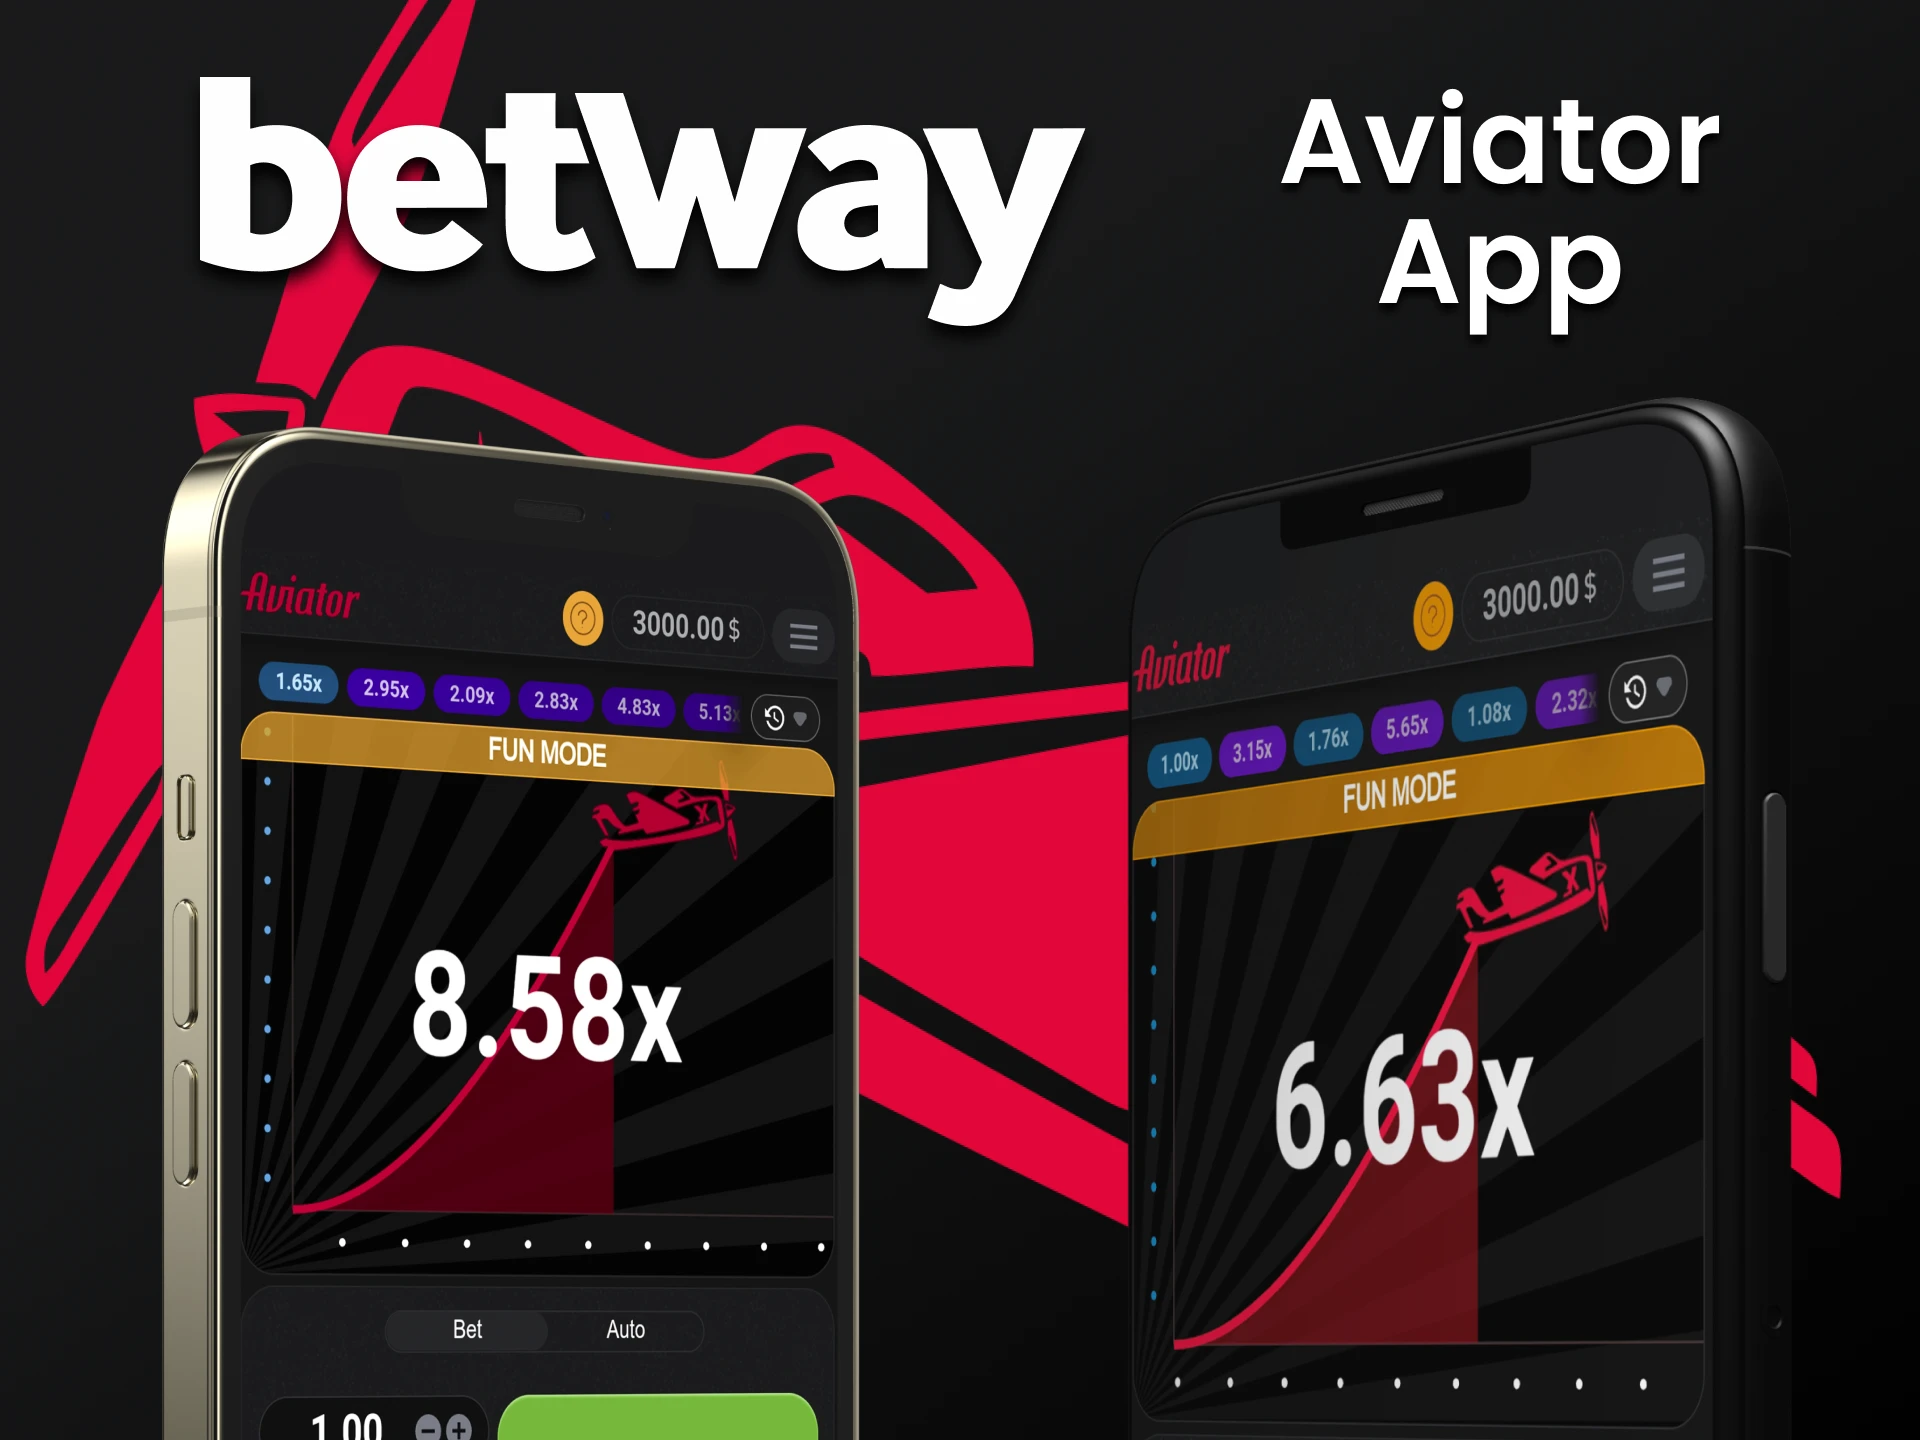 By downloading the Betway app, you can play Aviator on your smartphone.